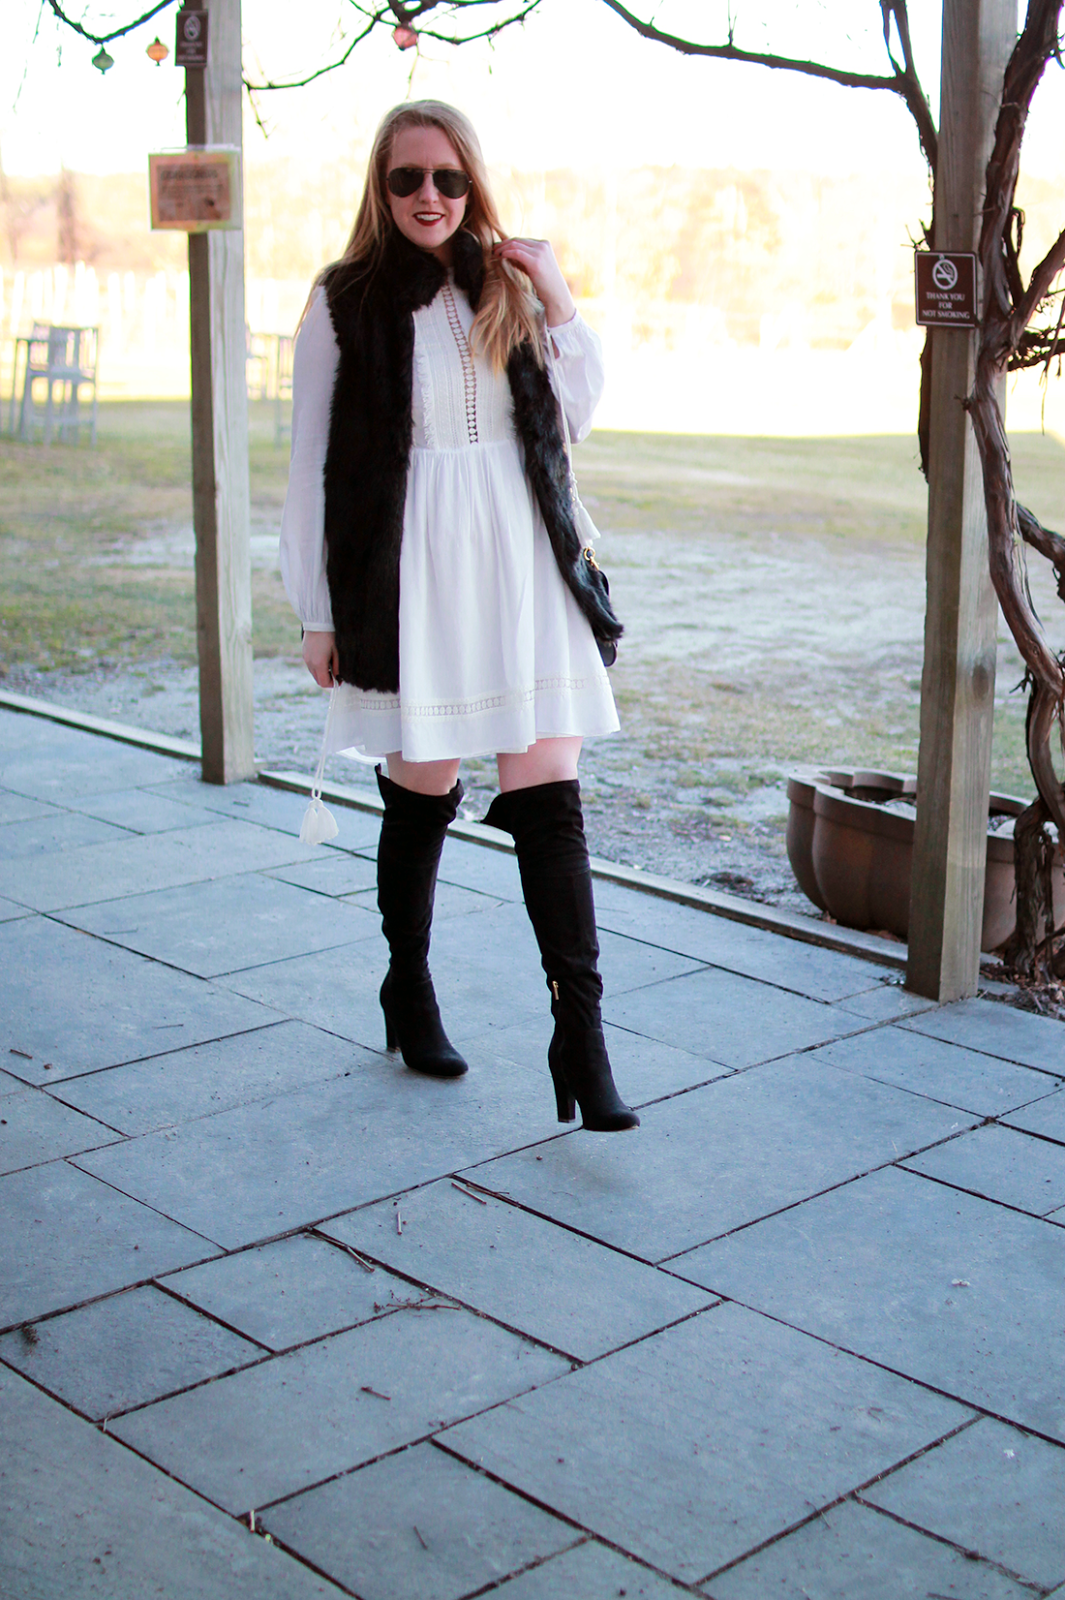 how to wear white in winter; white dresses in winter; over the knee boots with dress; boston style blogger; boston fashion blogger; boston blogger winter;